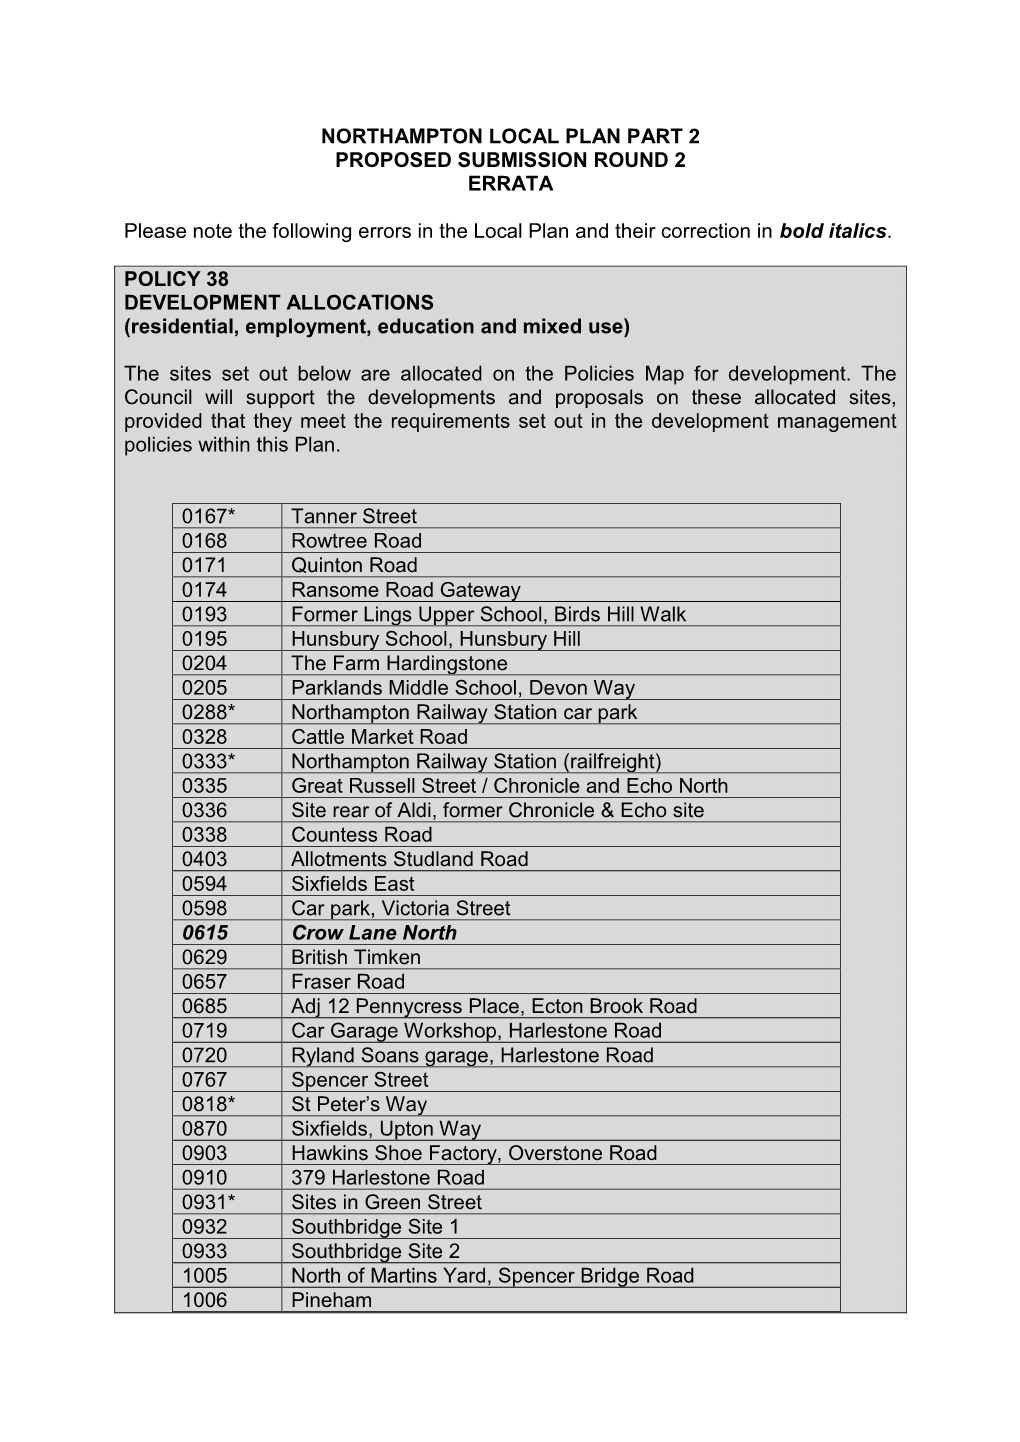 Download 01A Local Plan Part 2 Proposed Submission Errata